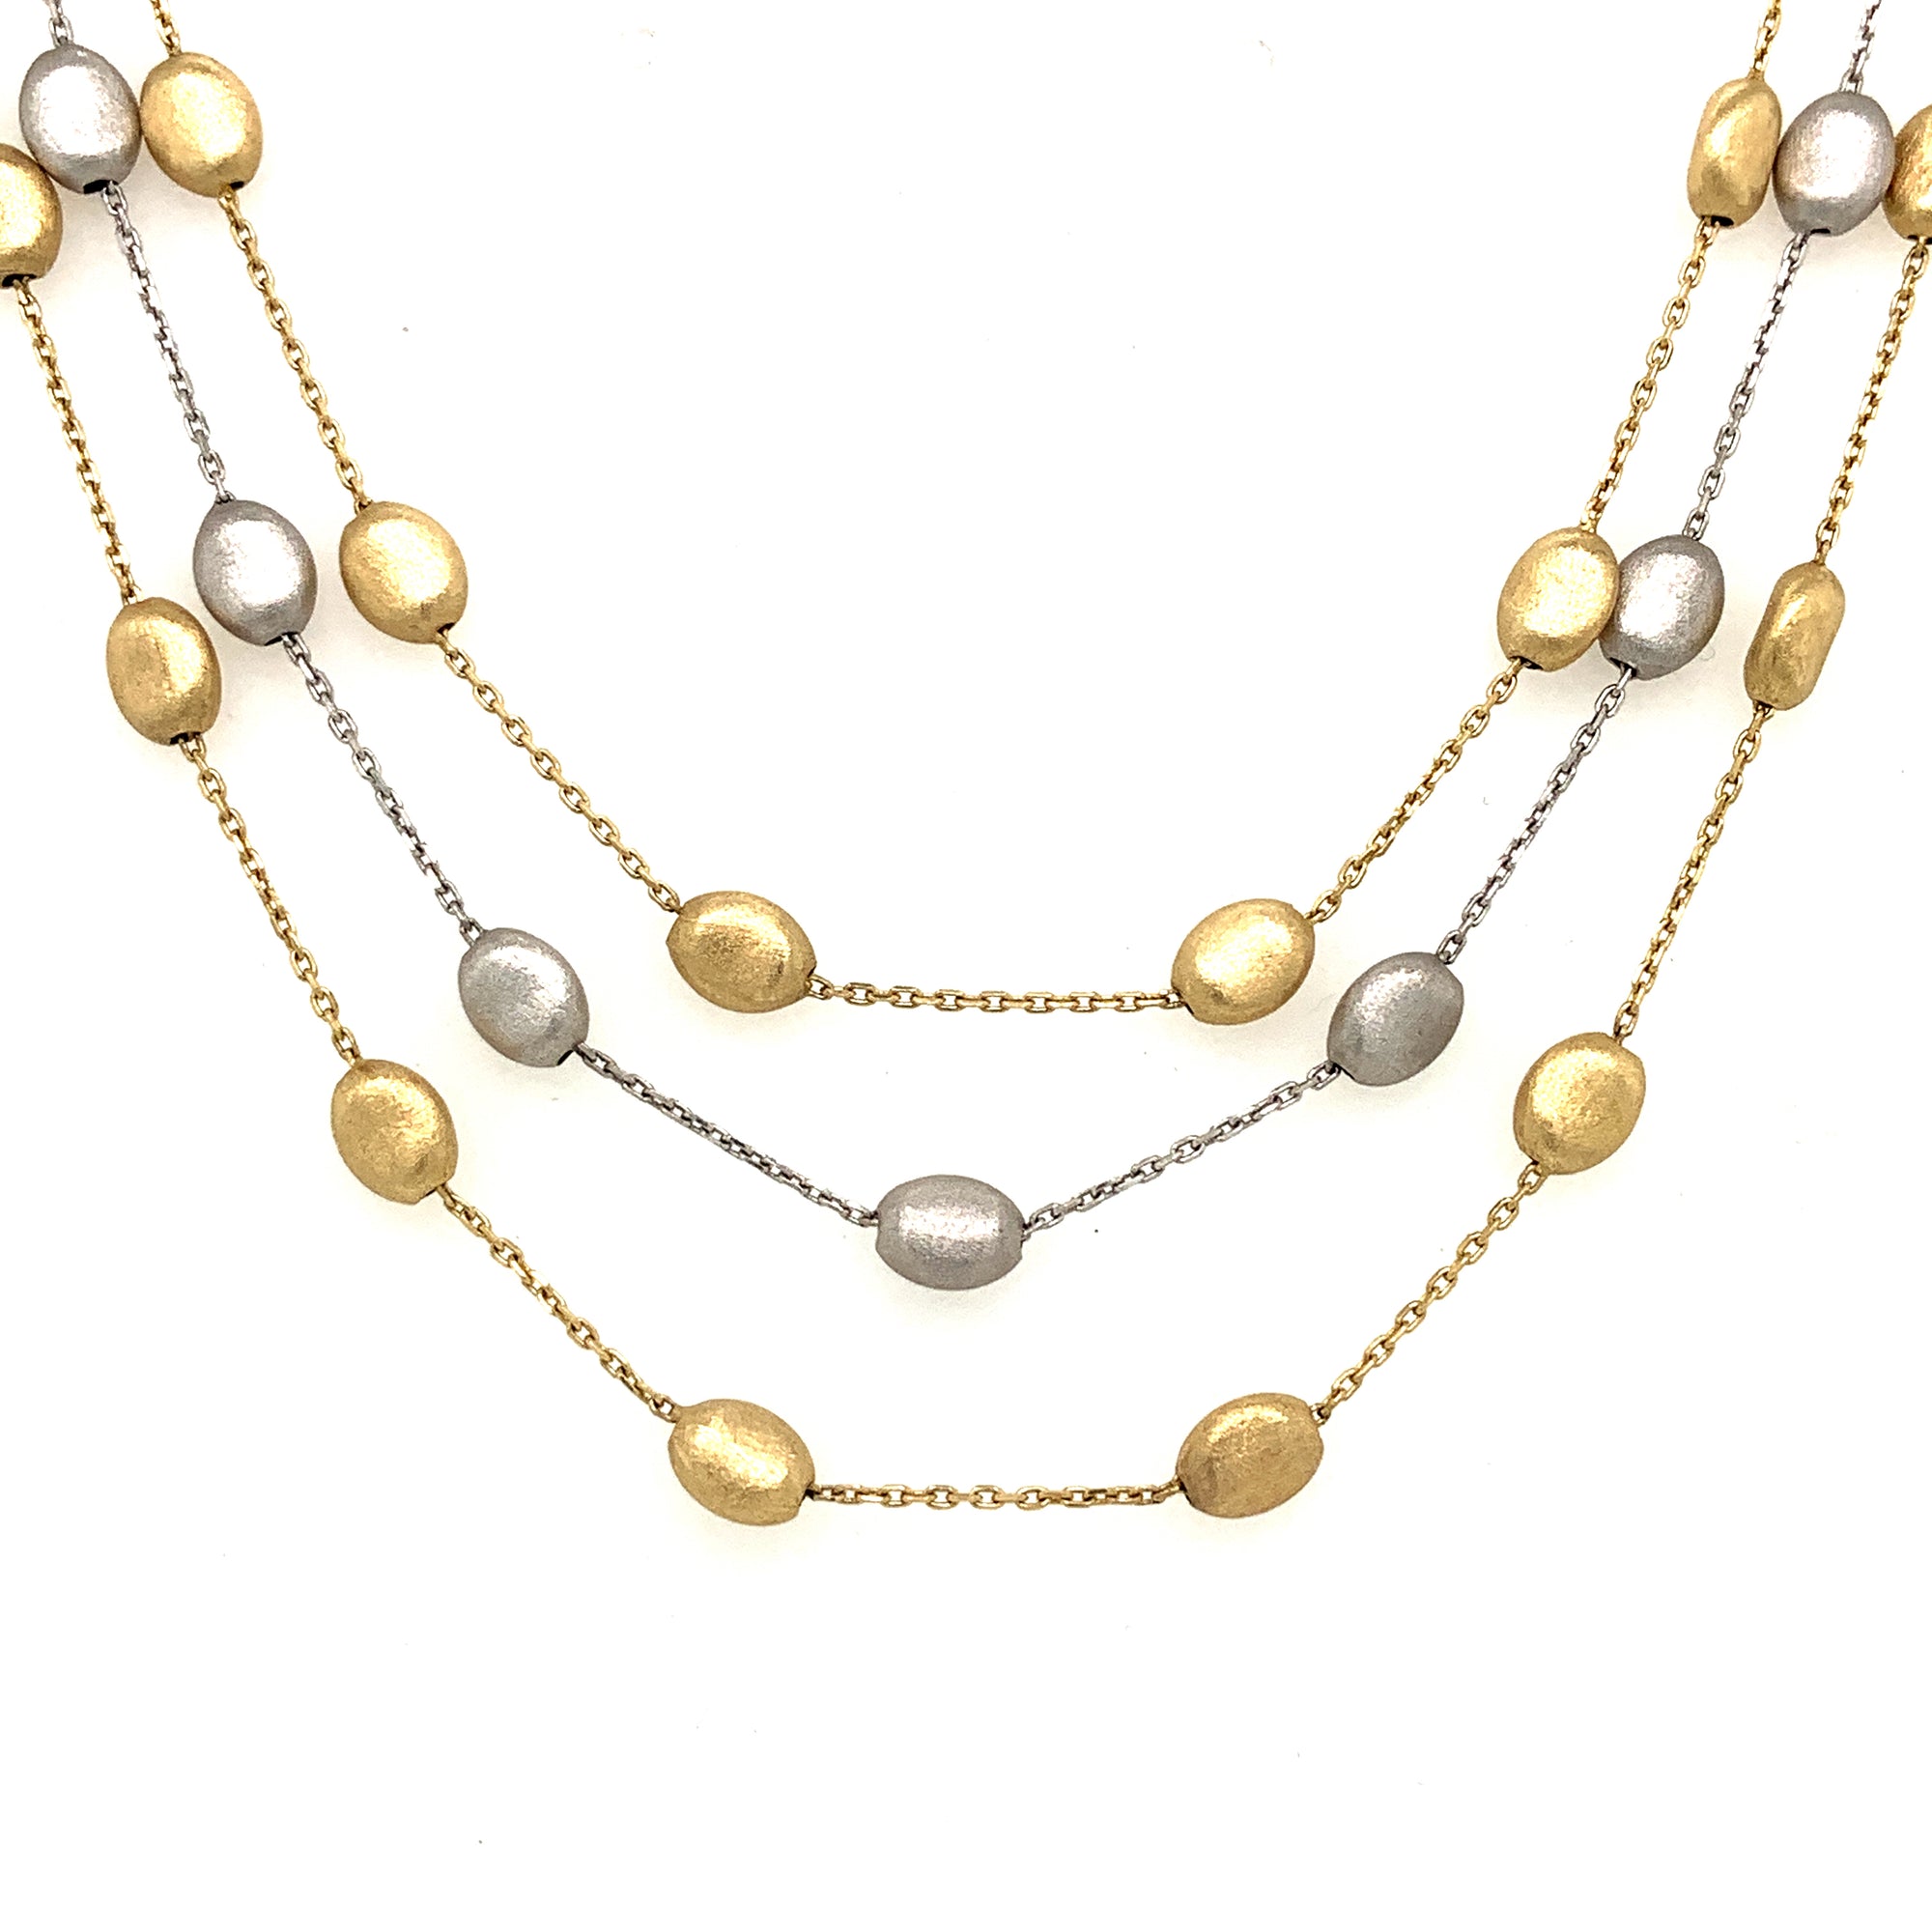 14K Yellow & White Gold Three Layer Bean Necklace with Matte Finish